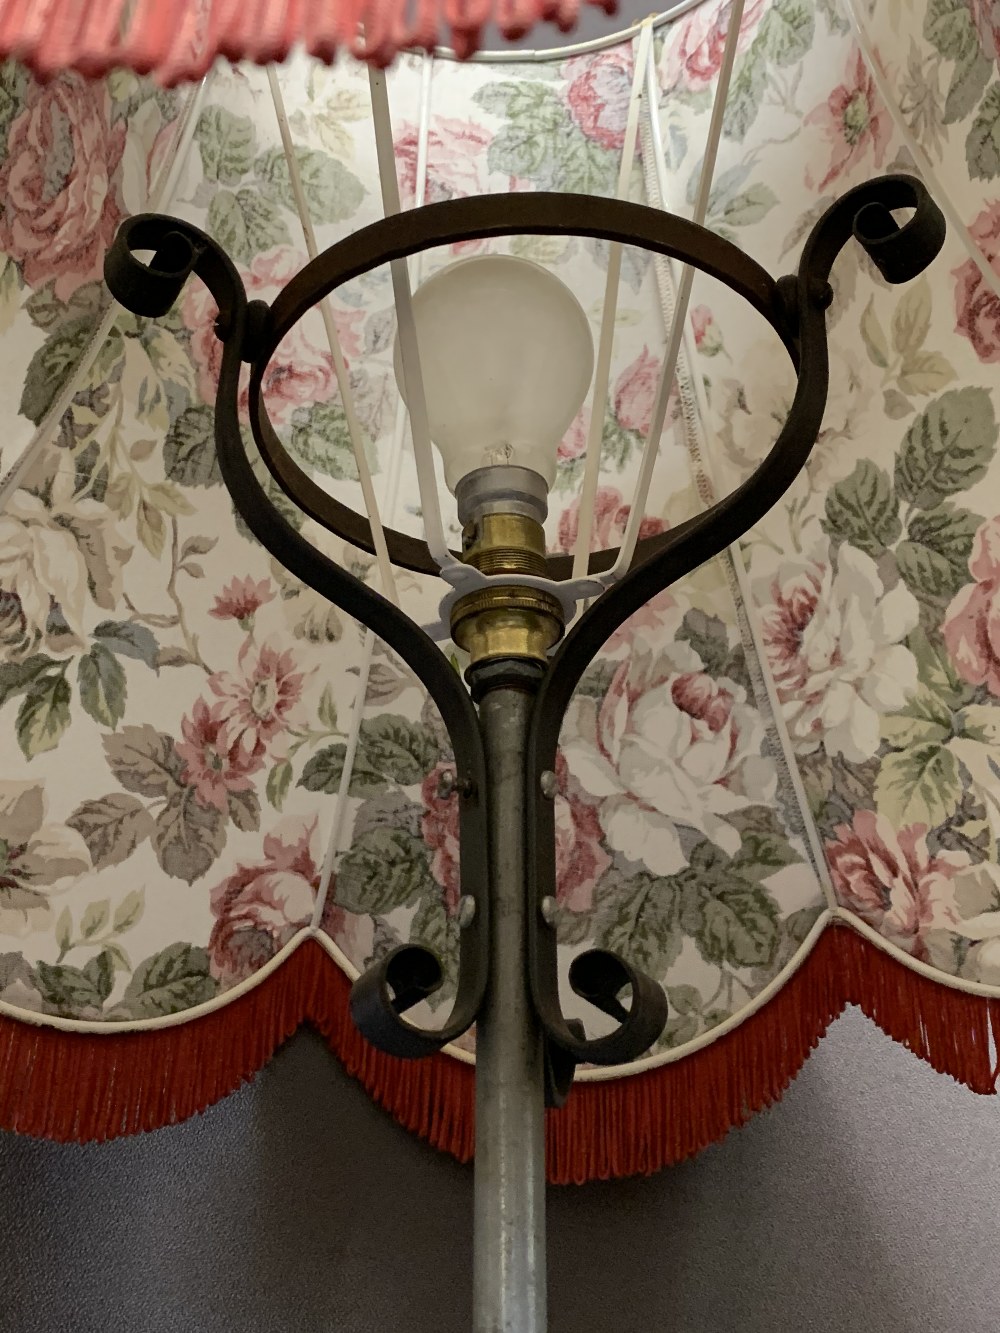 VICTORIAN WROUGHT IRON 'RISE & FALL' STANDARD LAMP - Image 2 of 3